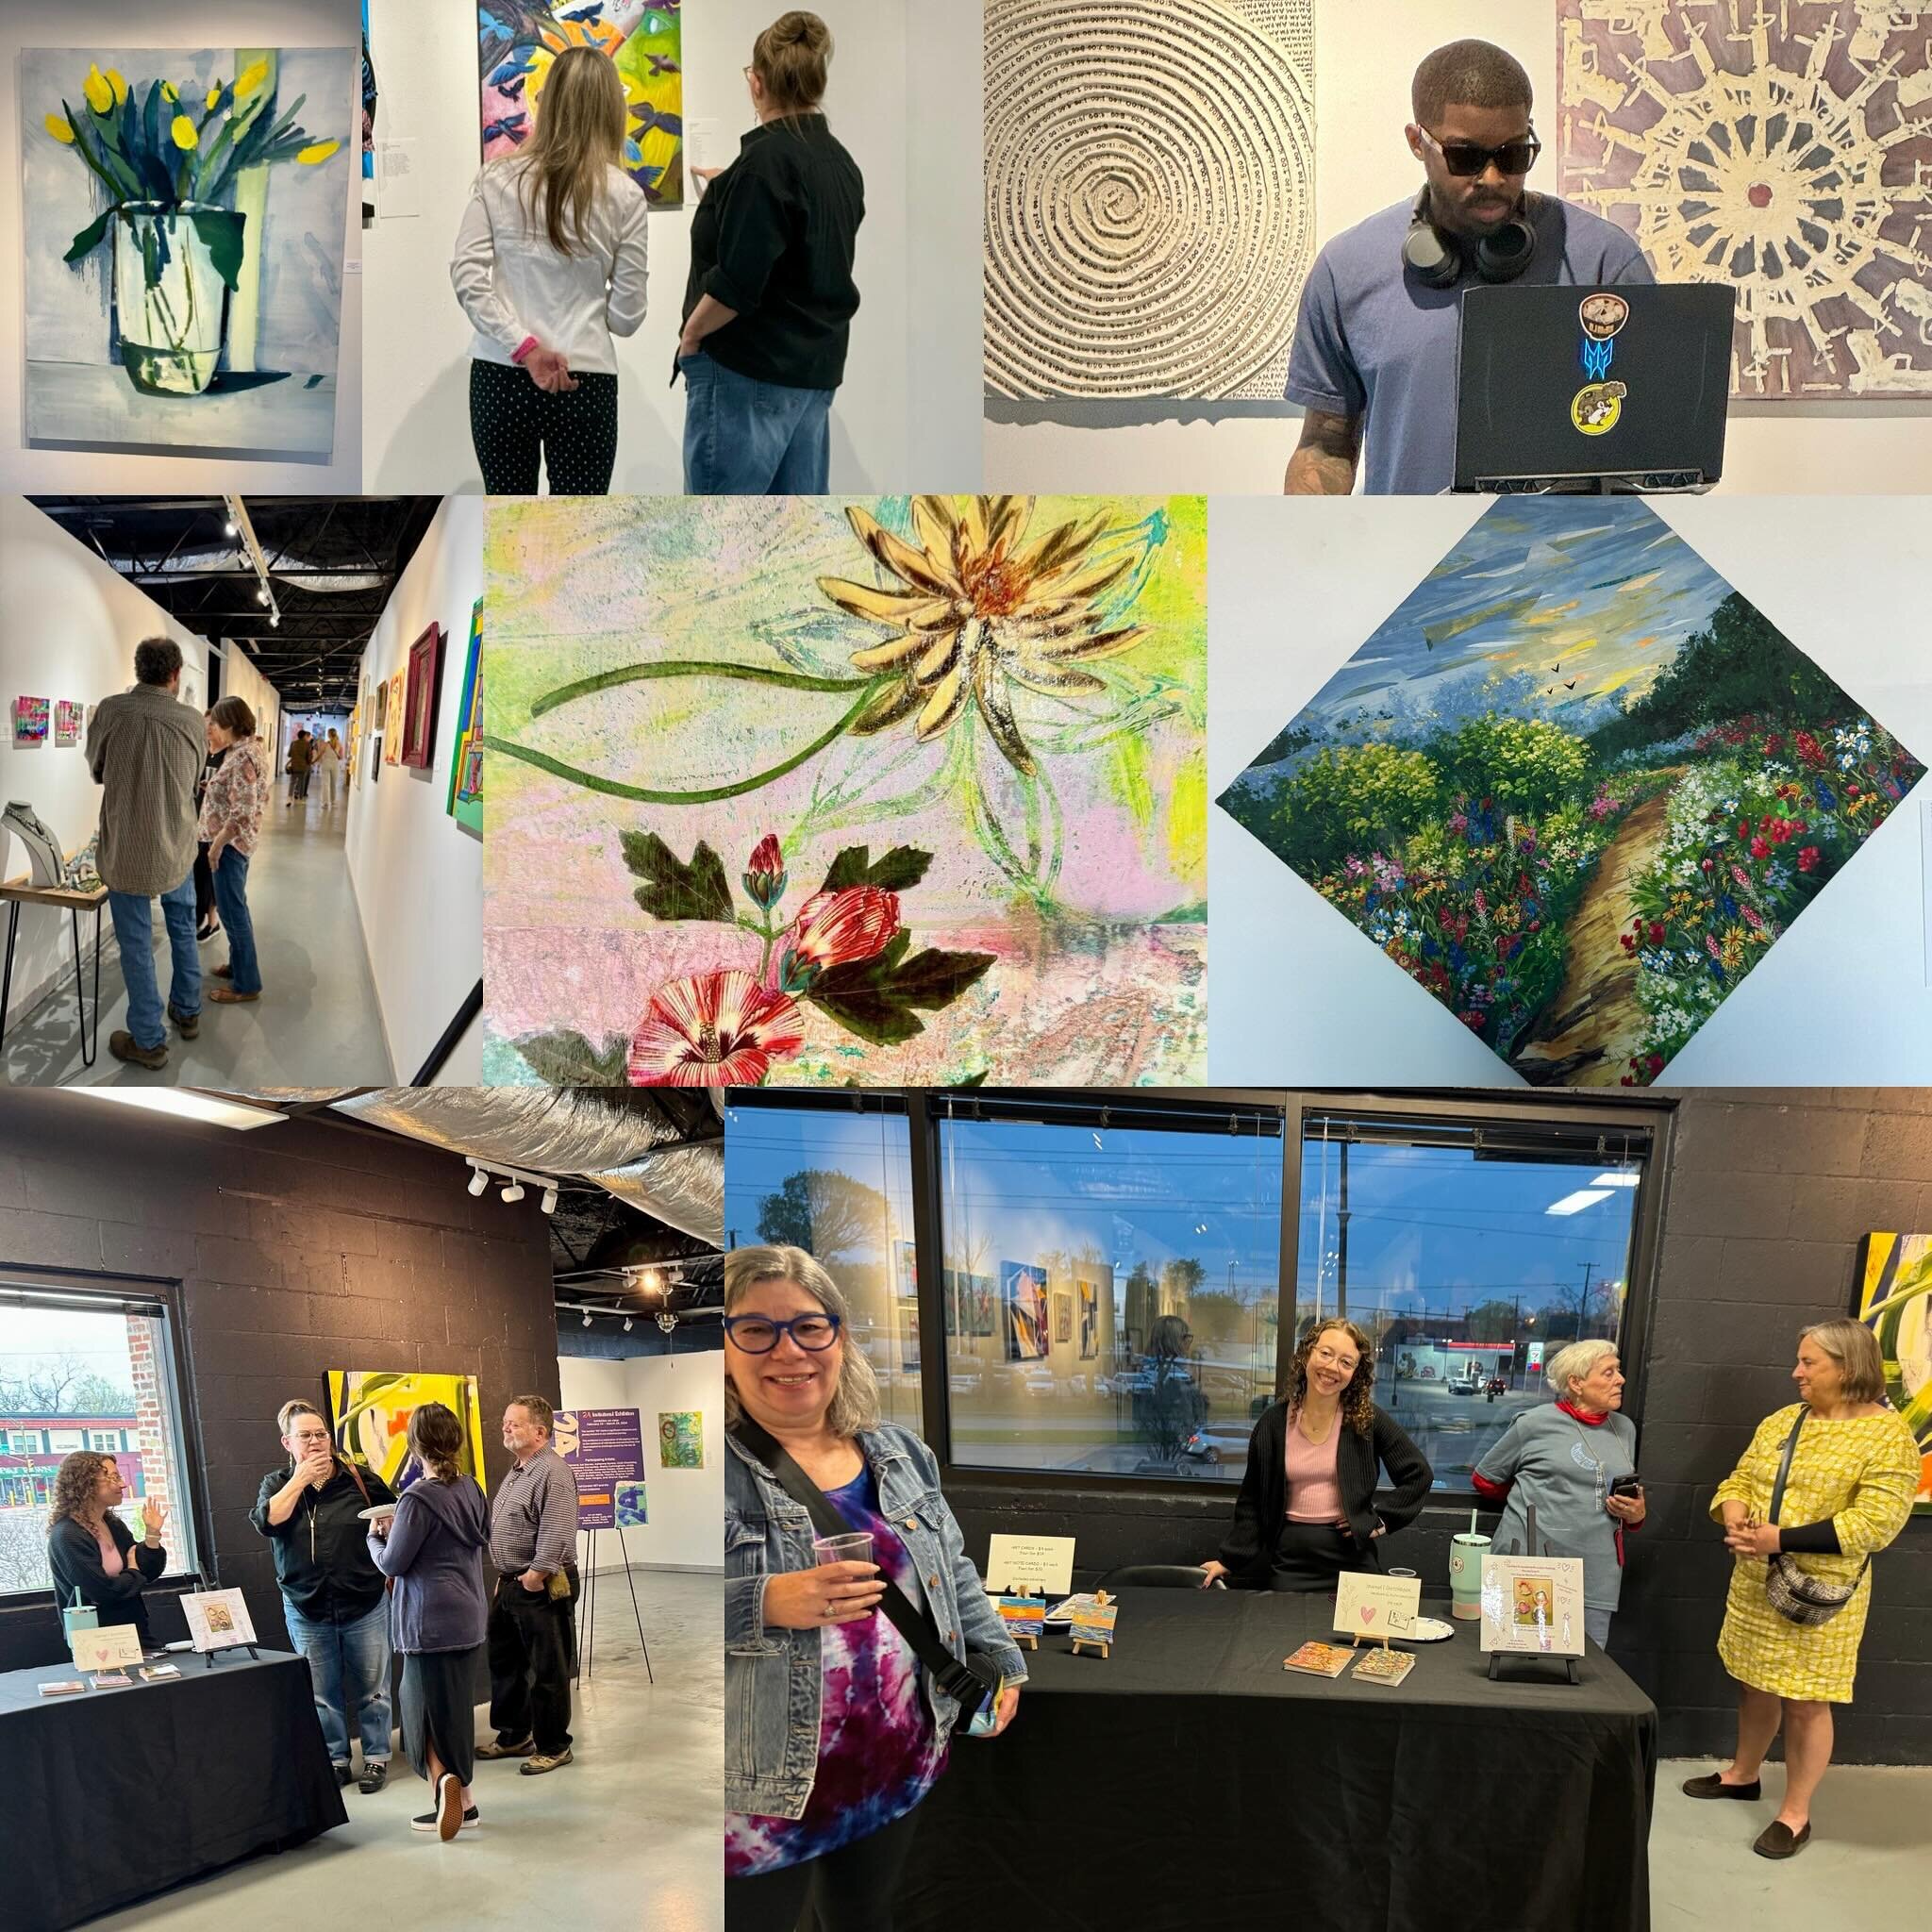 Thank to everyone who joined us to welcome in spring at our Open House last night! It was a beautiful evening to enjoy art, good conversation and perfect weather!